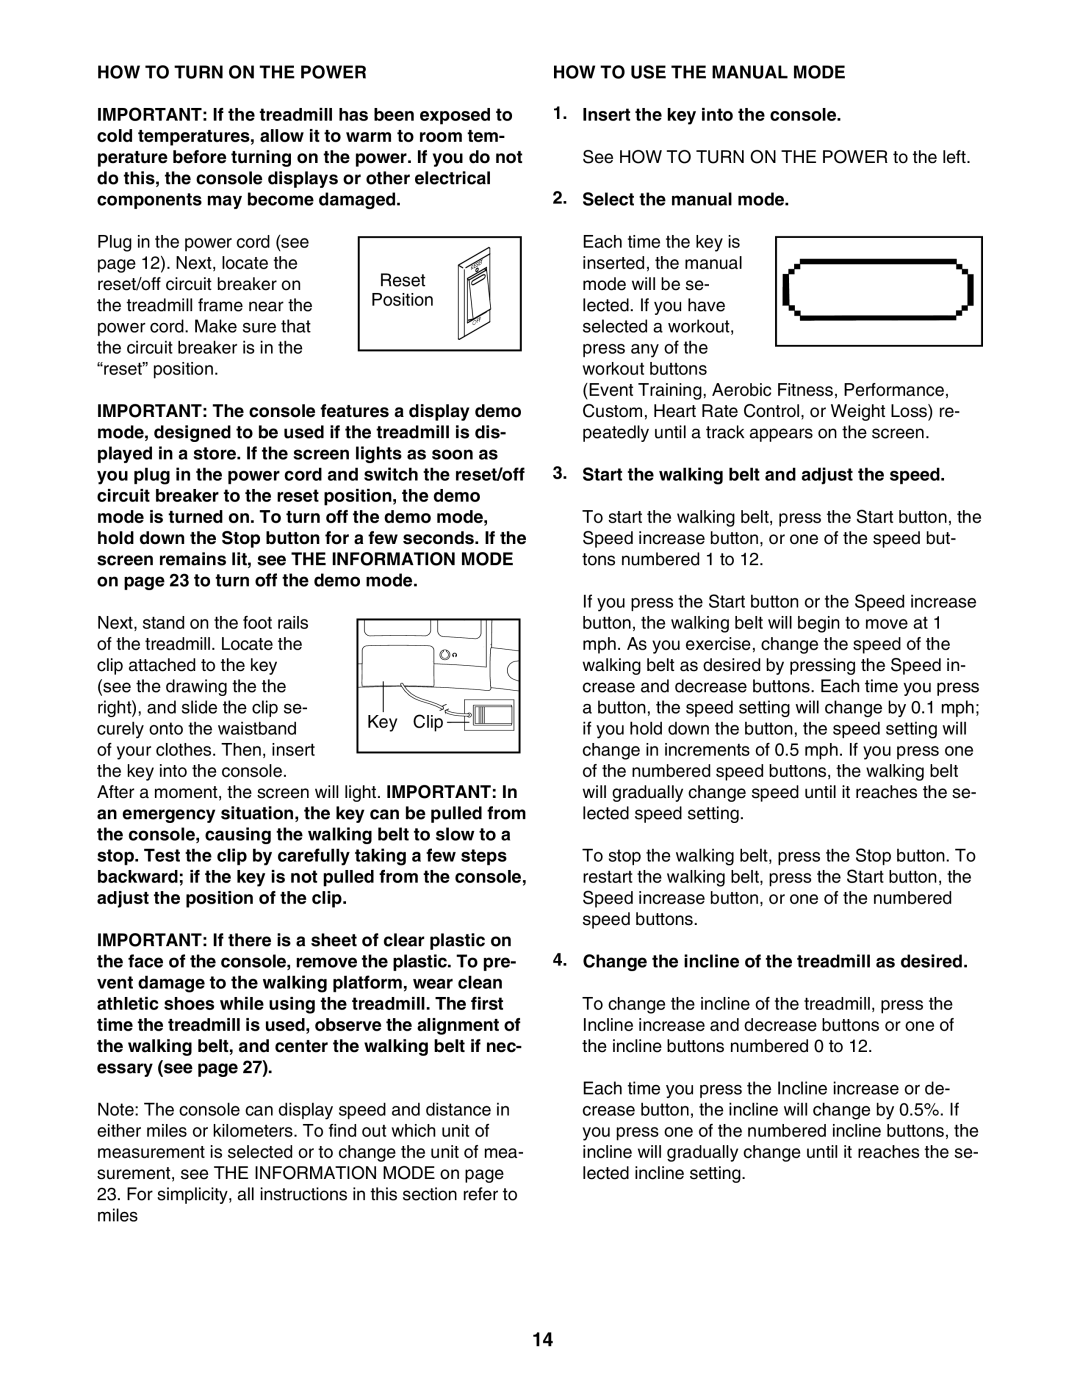 NordicTrack NTL19007.0 user manual HOW to Turn on the Power, HOW to USE the Manual Mode 